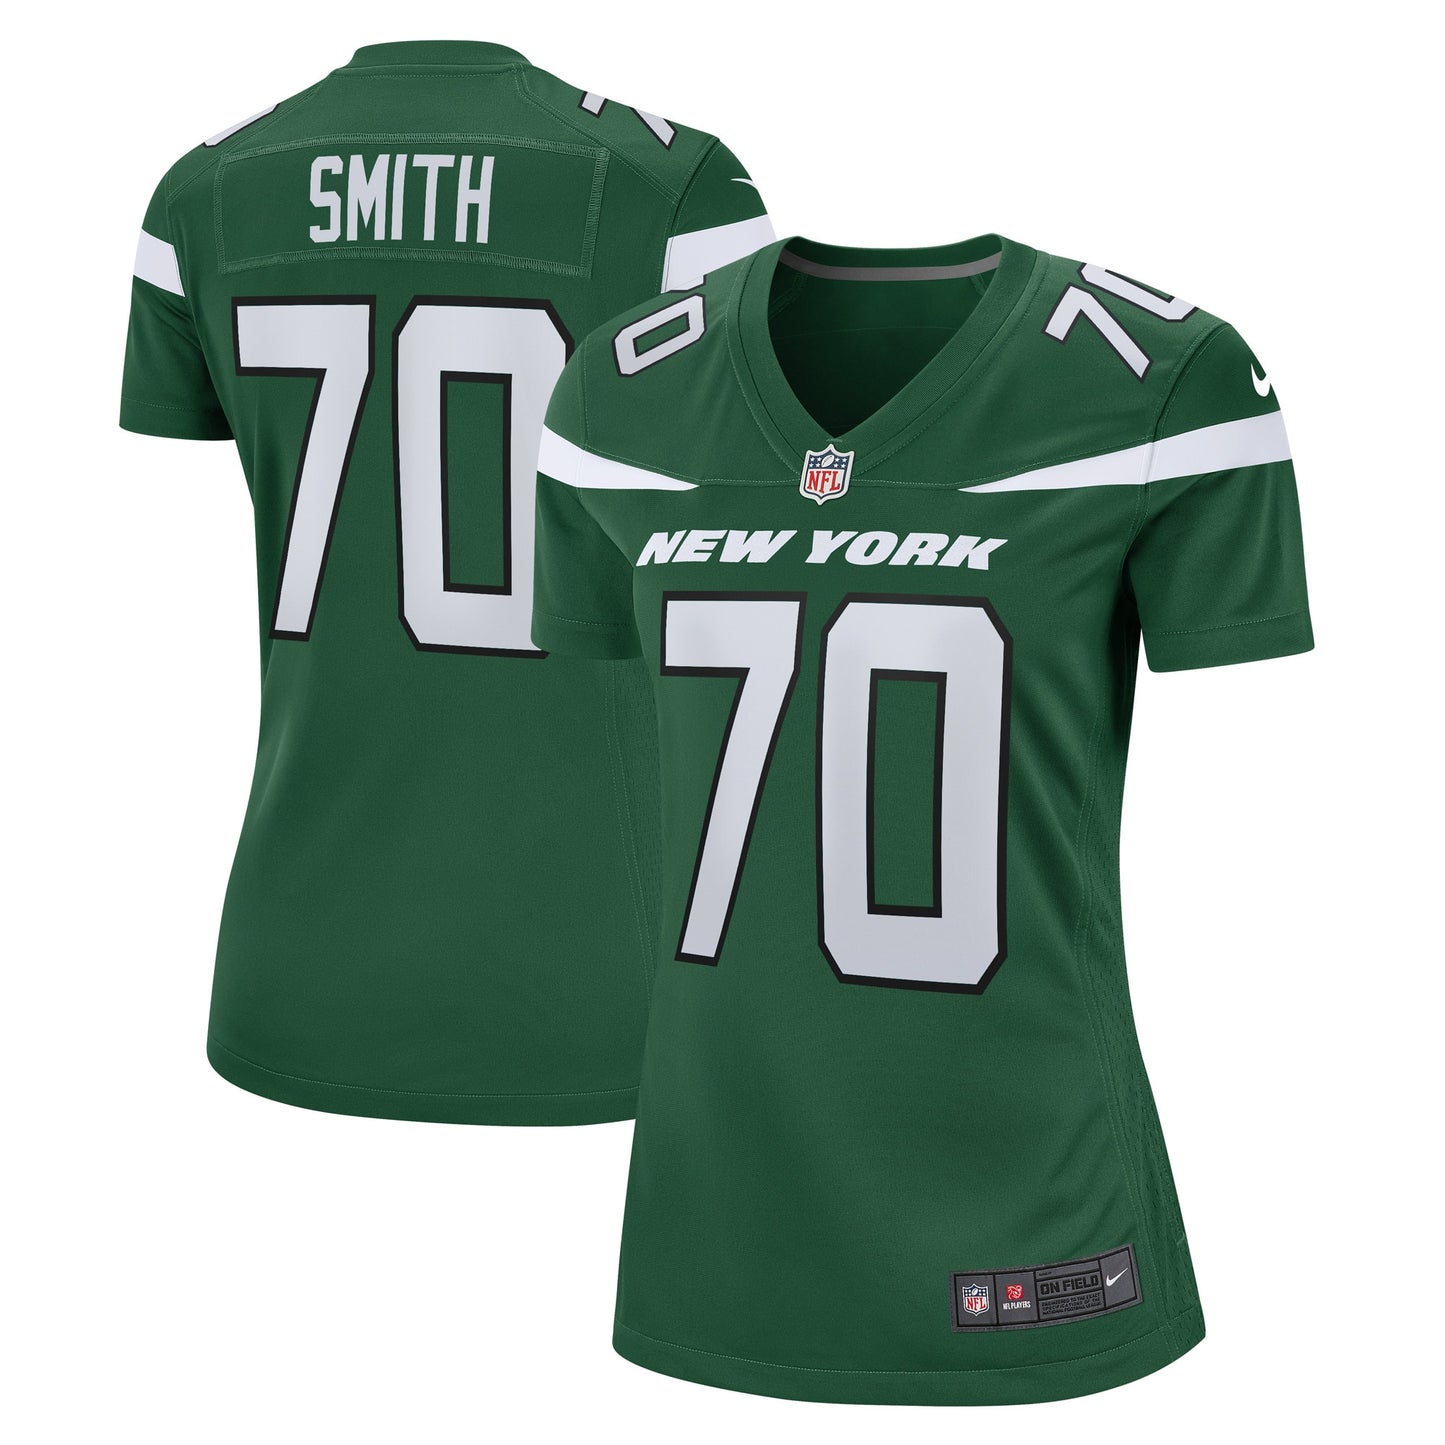 Eric Smith New York Jets Nike Women's Game Player Jersey - Gotham Green